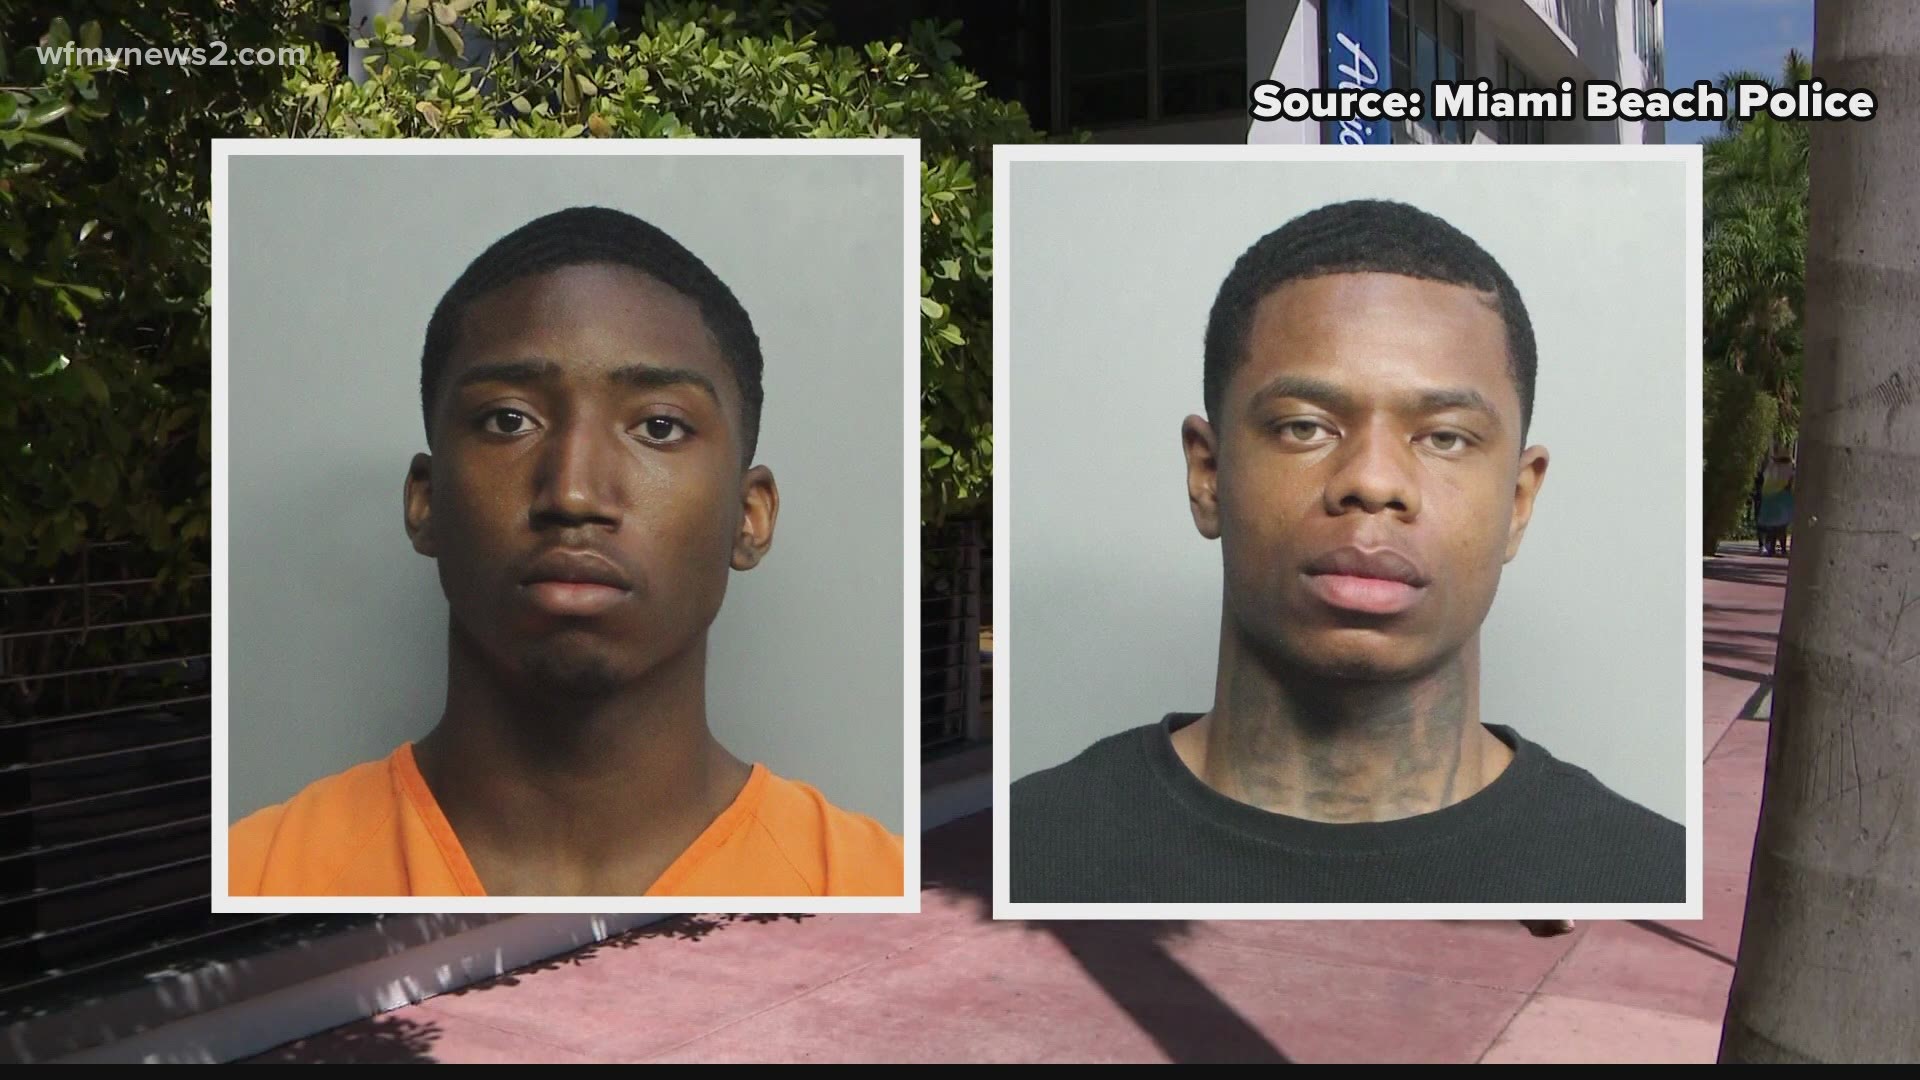 Miami Beach police say Dorian Taylor and Evoire Collier sexually assaulted a woman, who later died.